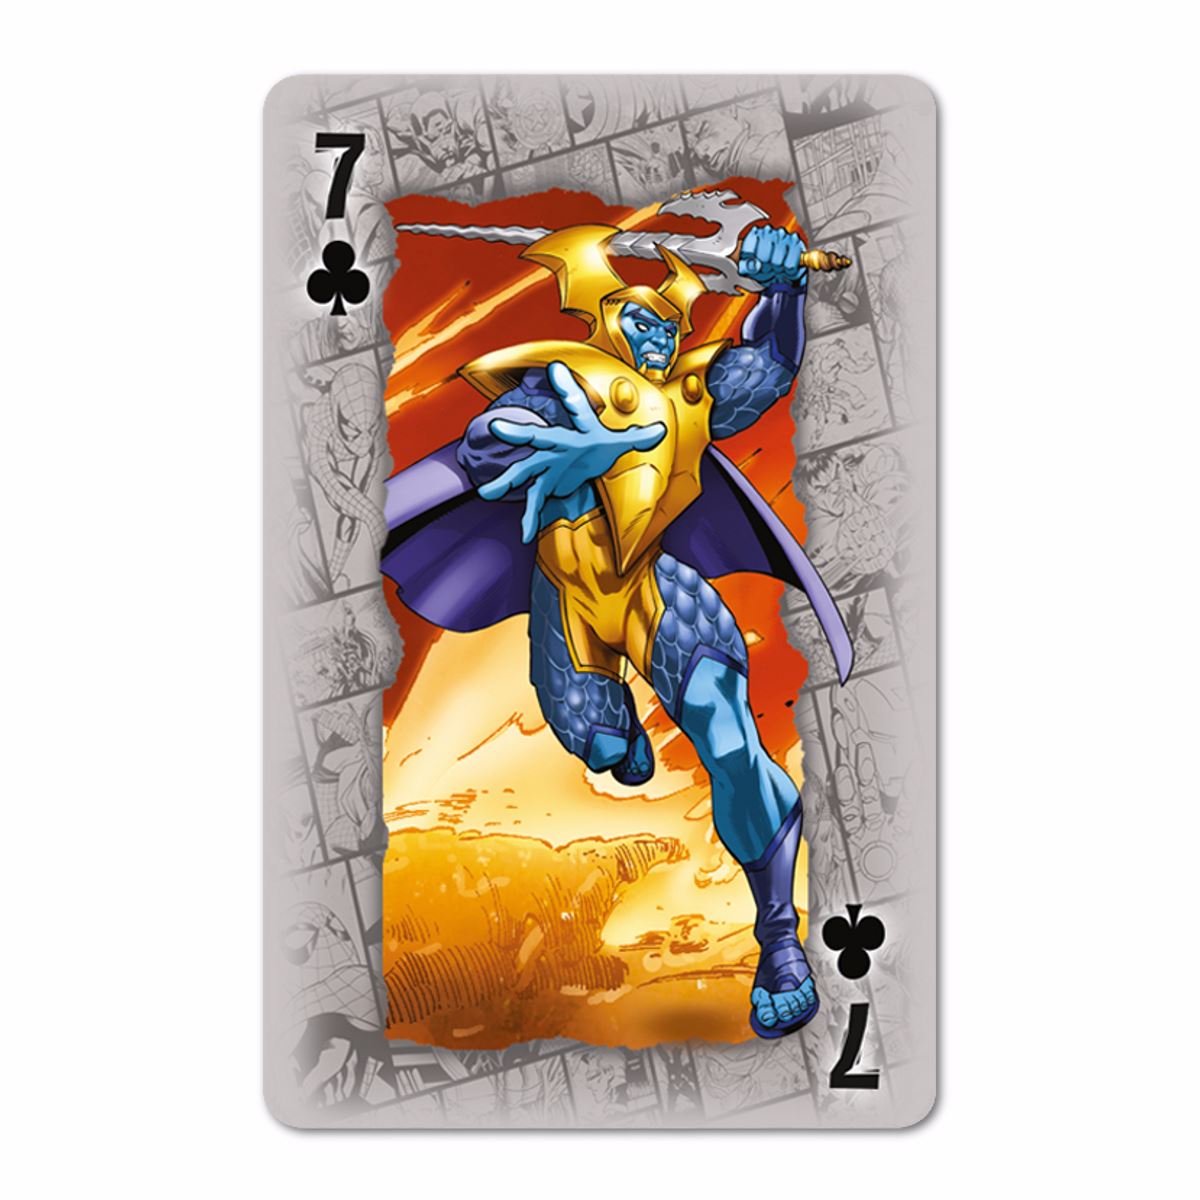 Marvel Universe Waddingtons Number 1 Playing Cards